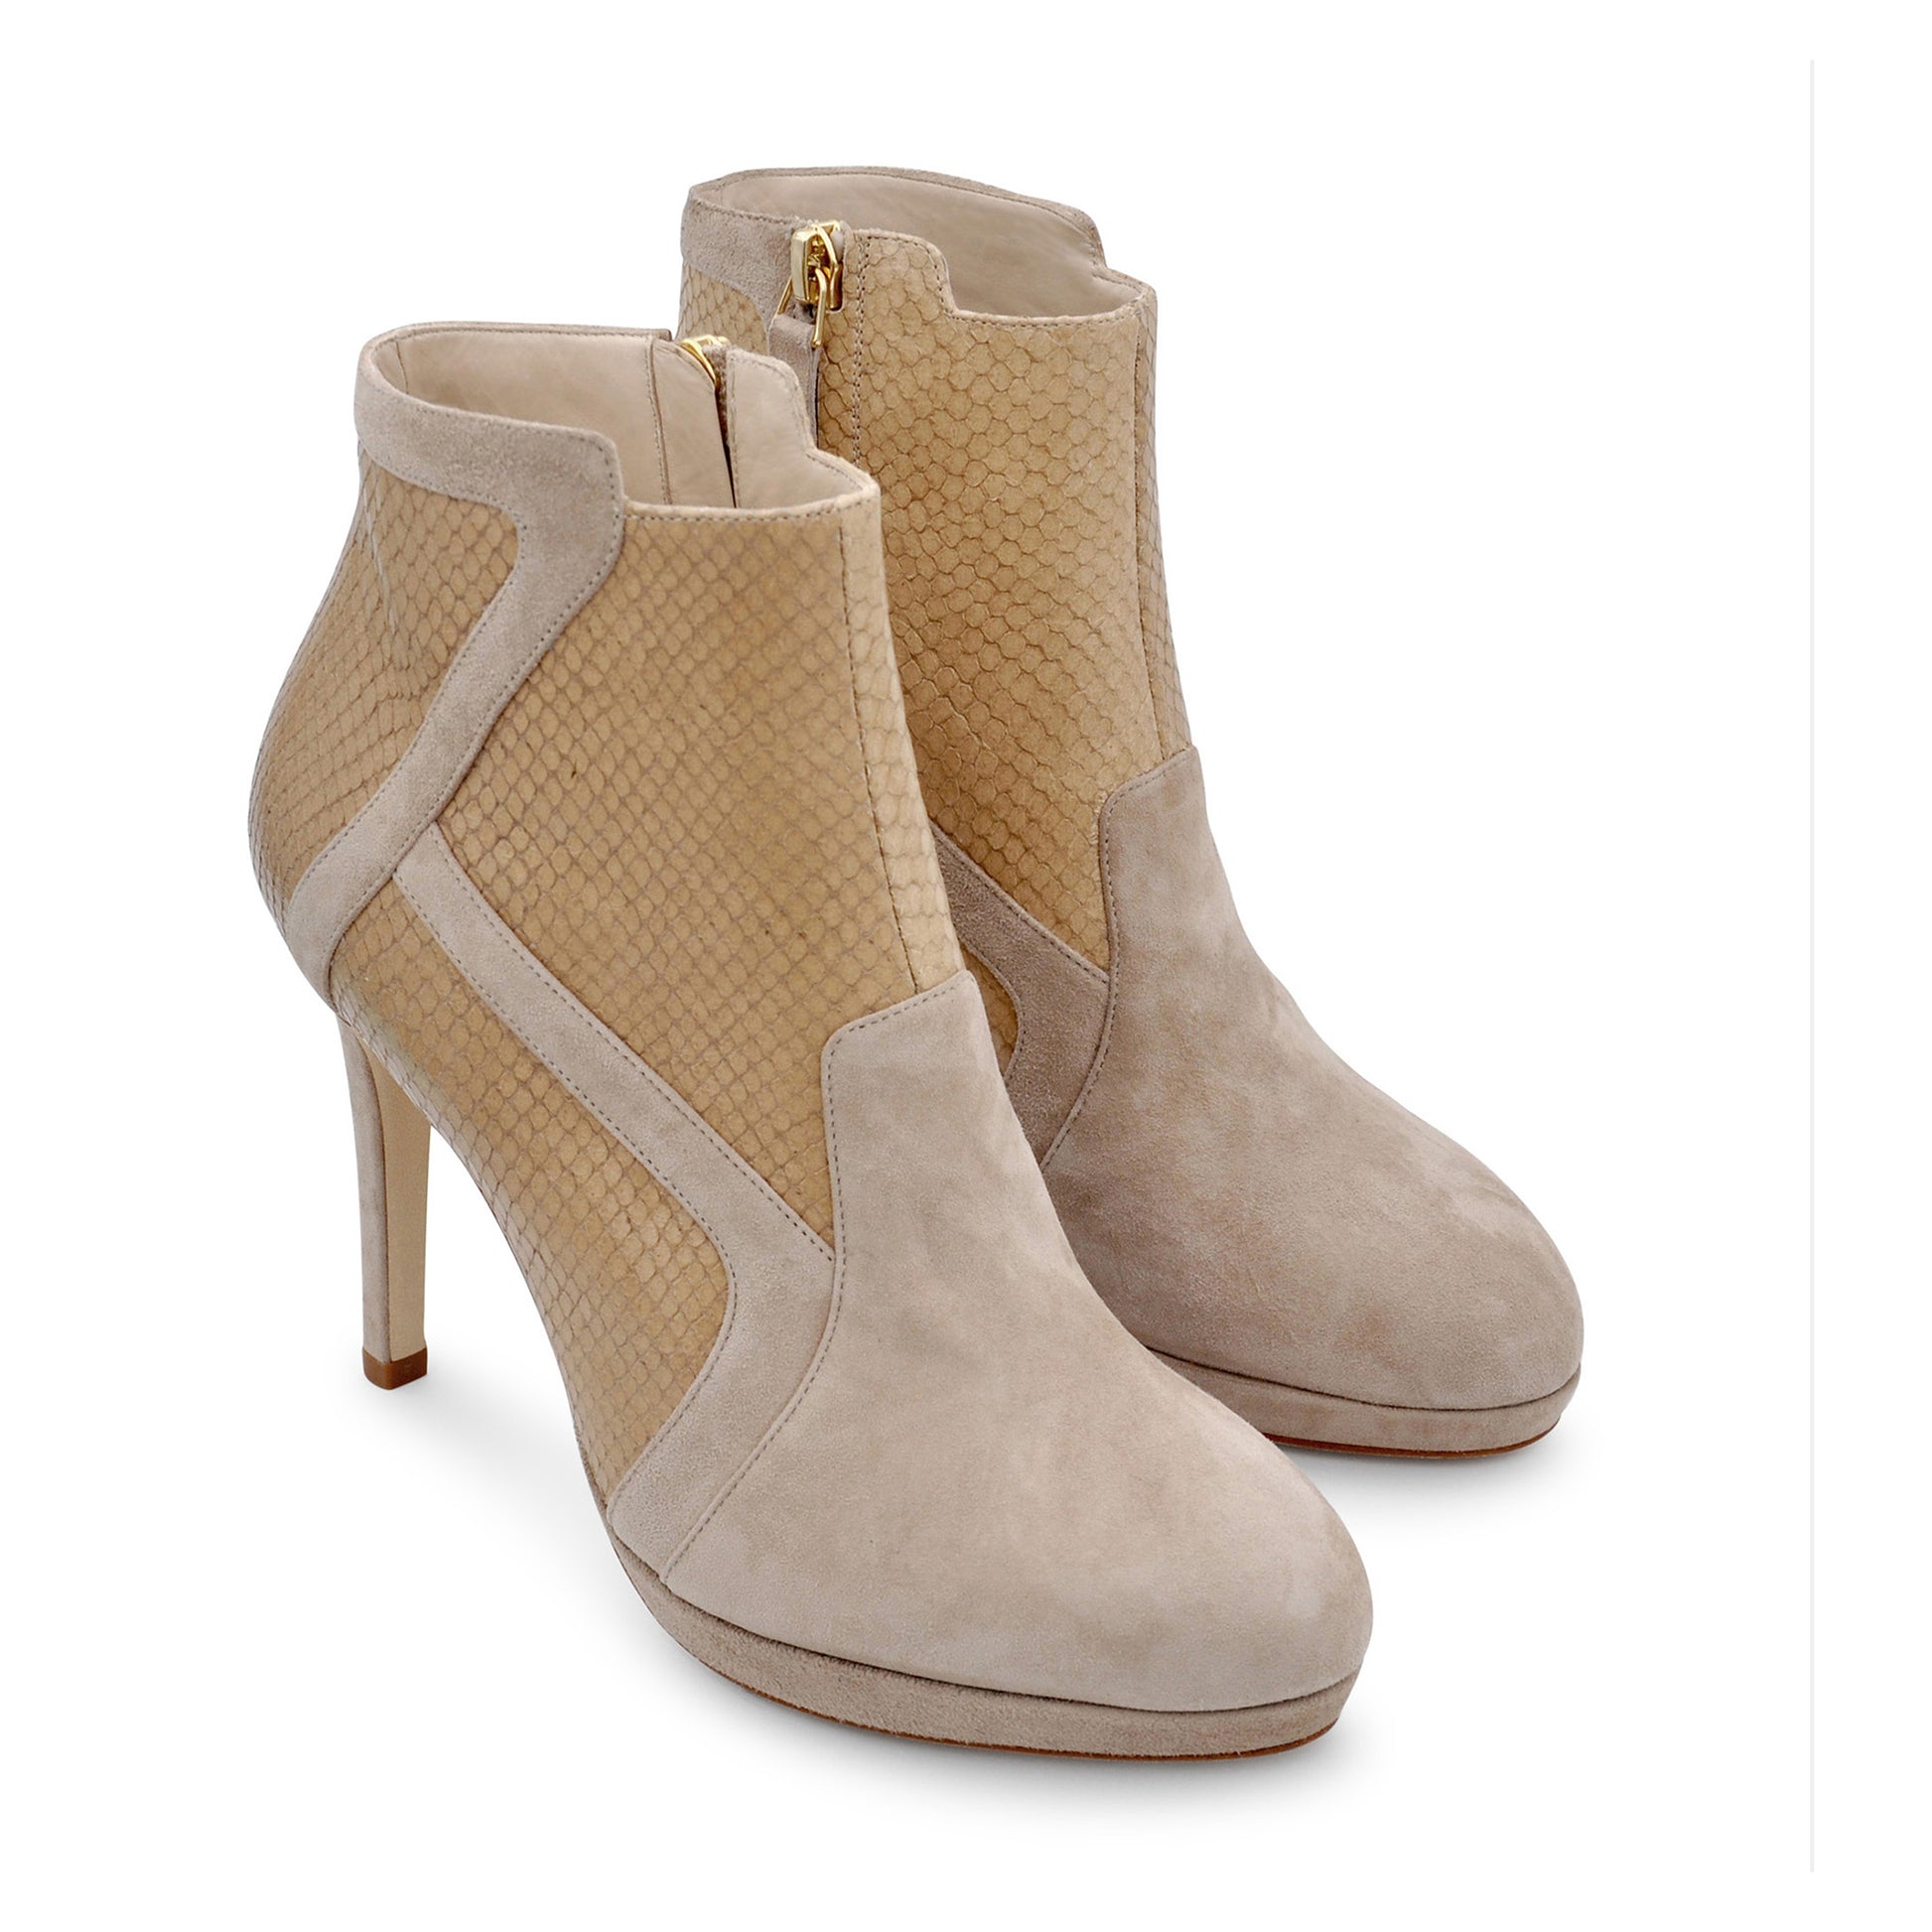 The Deia Bootie - Camel Python and Suede High Heel Boot…